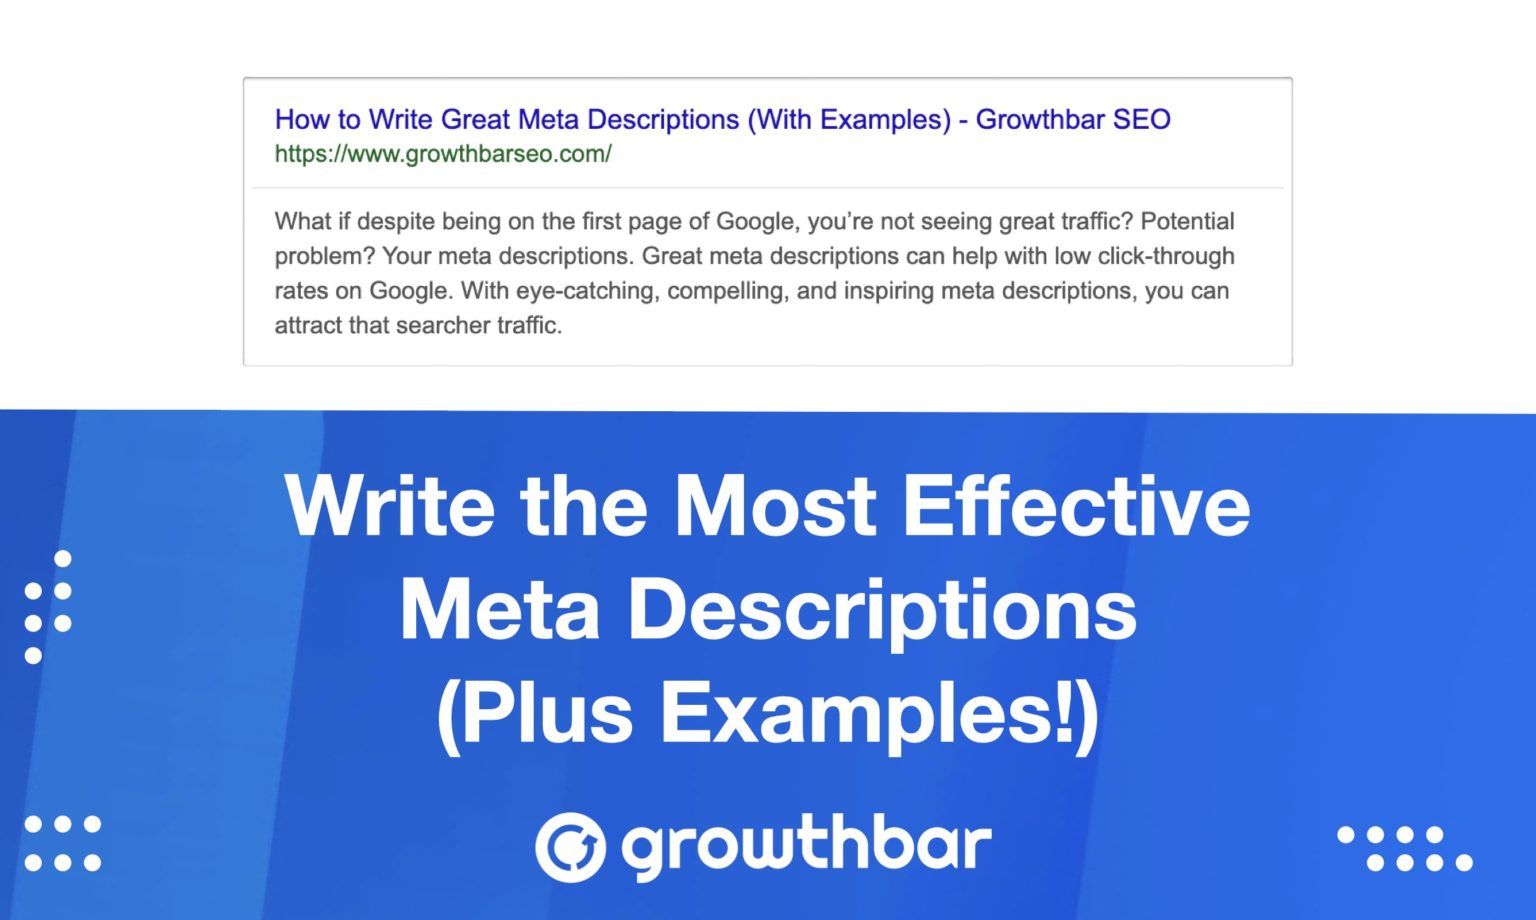 How to Write Great Meta Descriptions in 2023 (With Examples)